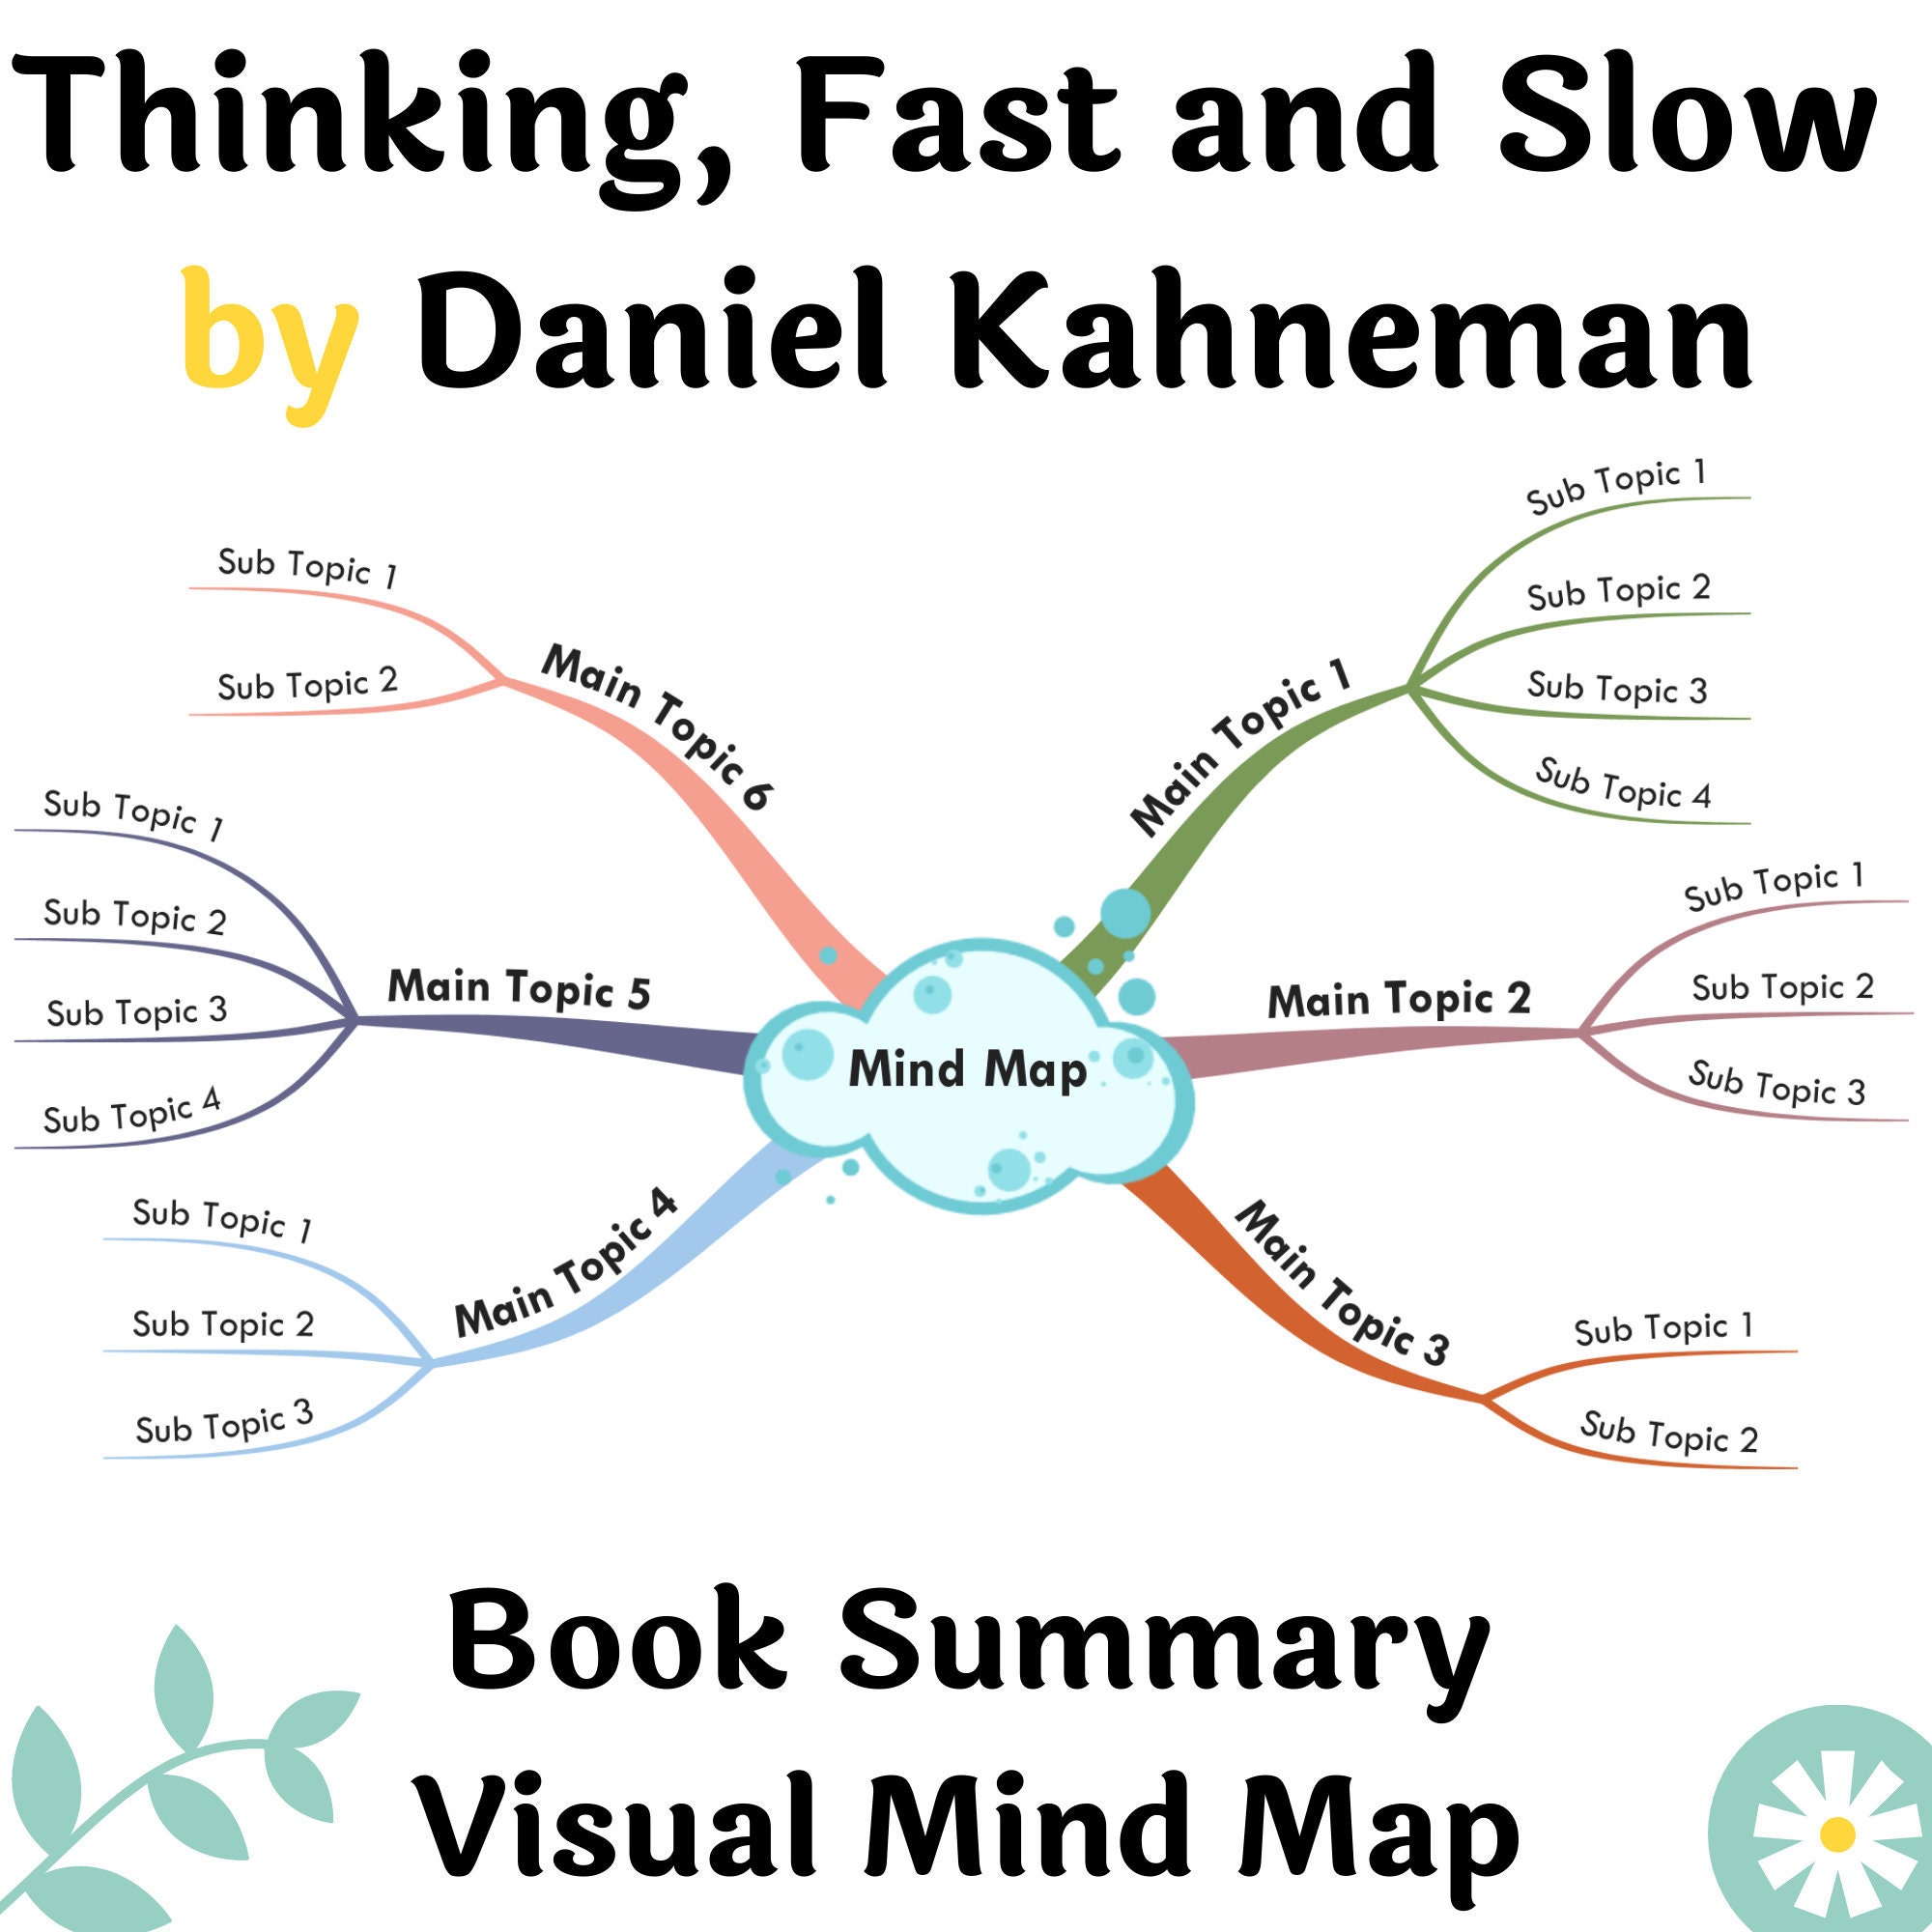 Book Summary Printable Mind Map Thinking, Fast and Slow by Daniel Kahneman  A3, A2 Printable Mind Map -  Sweden